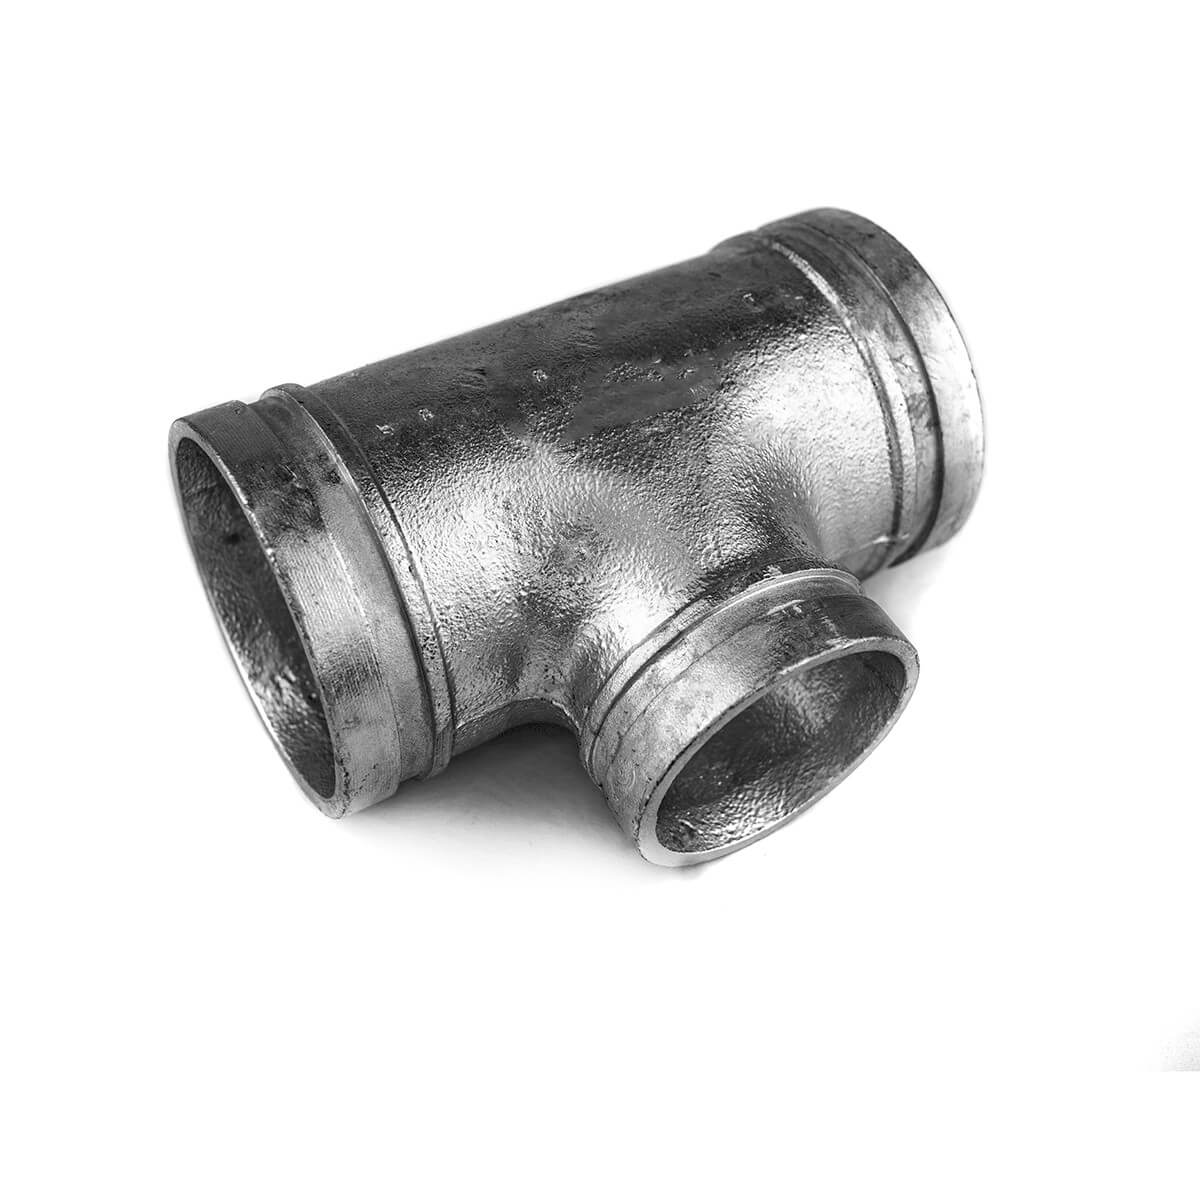 Grooved Link Metal Fittings Connect Tee